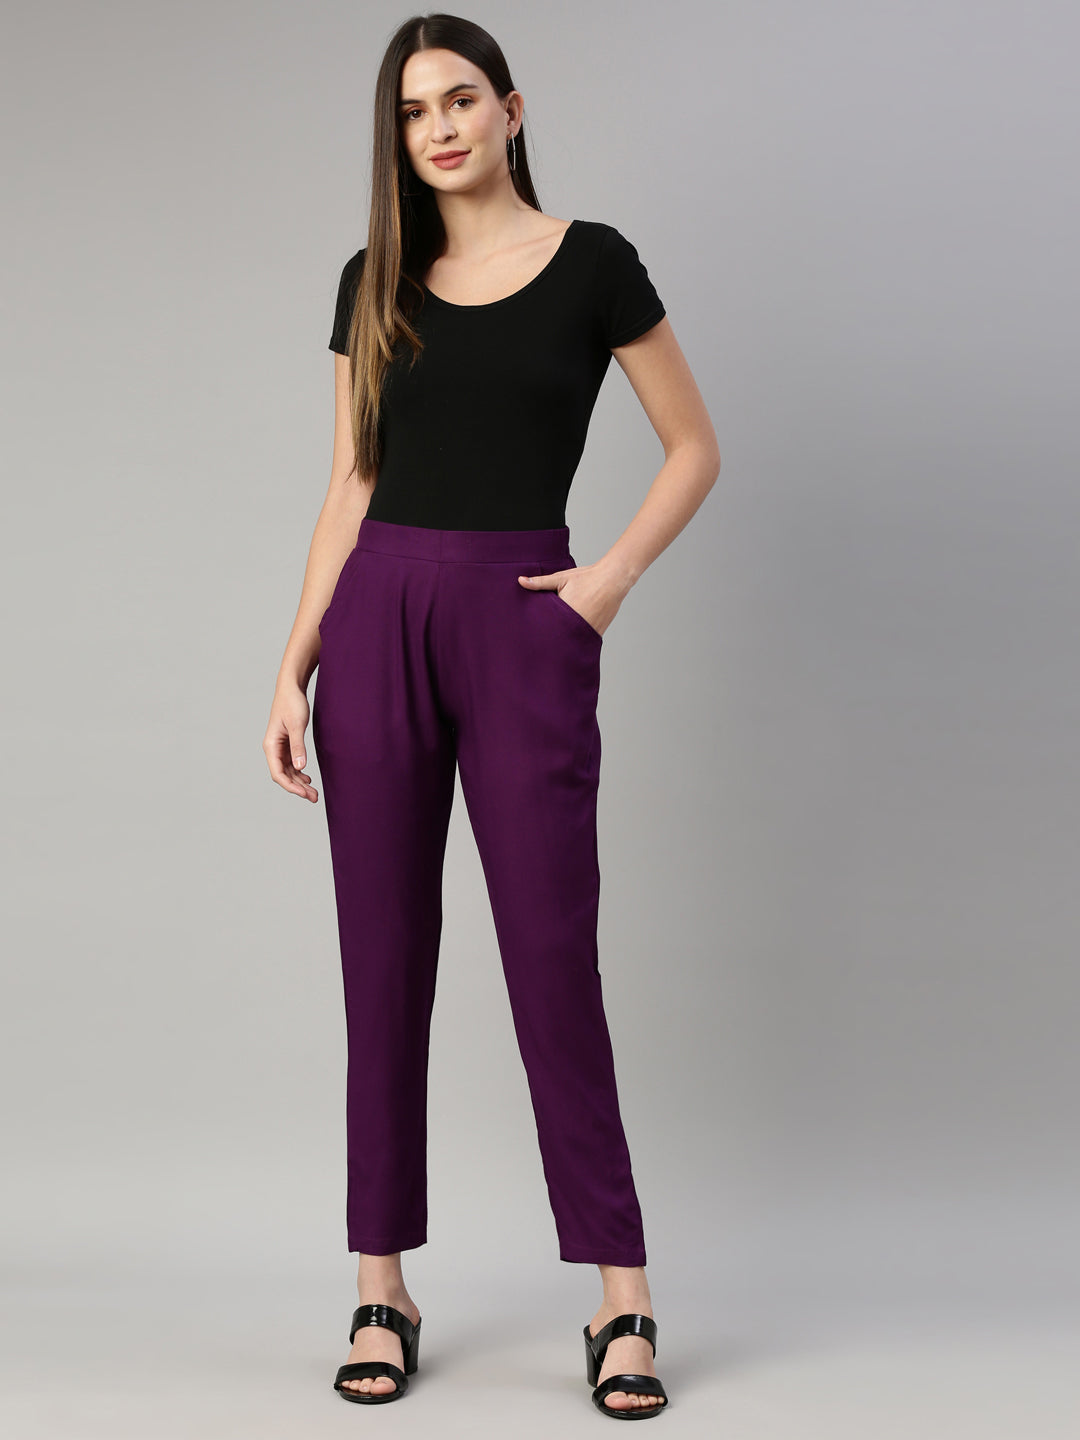 Womens Solid Pencil Pant - Purple